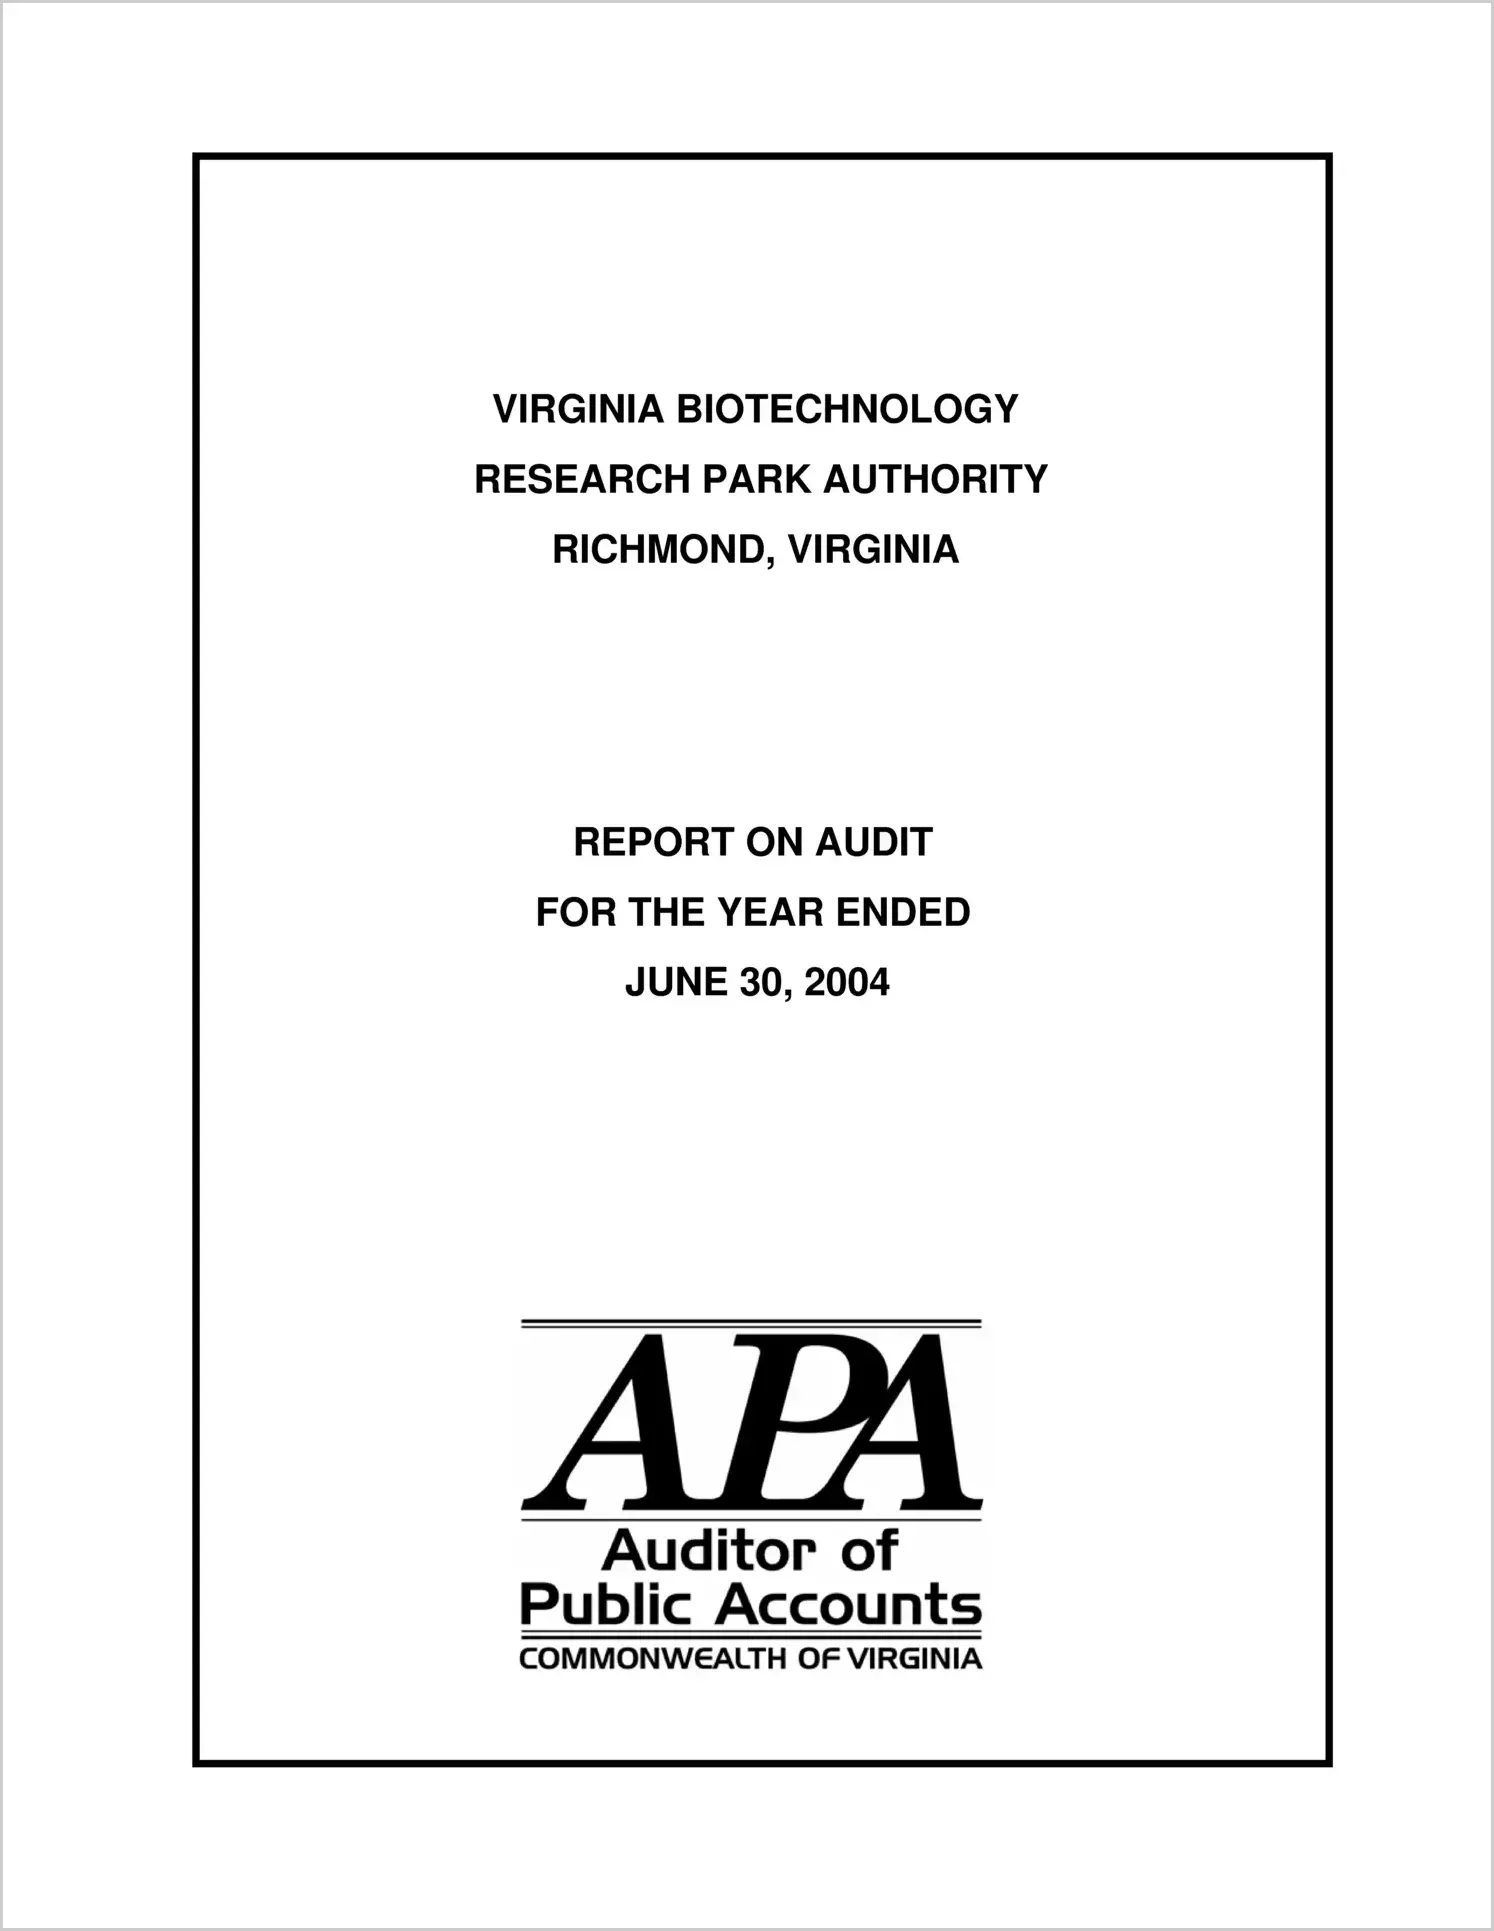 Virginia Biotechnology Research Park Authority for the year ended June 30, 2004